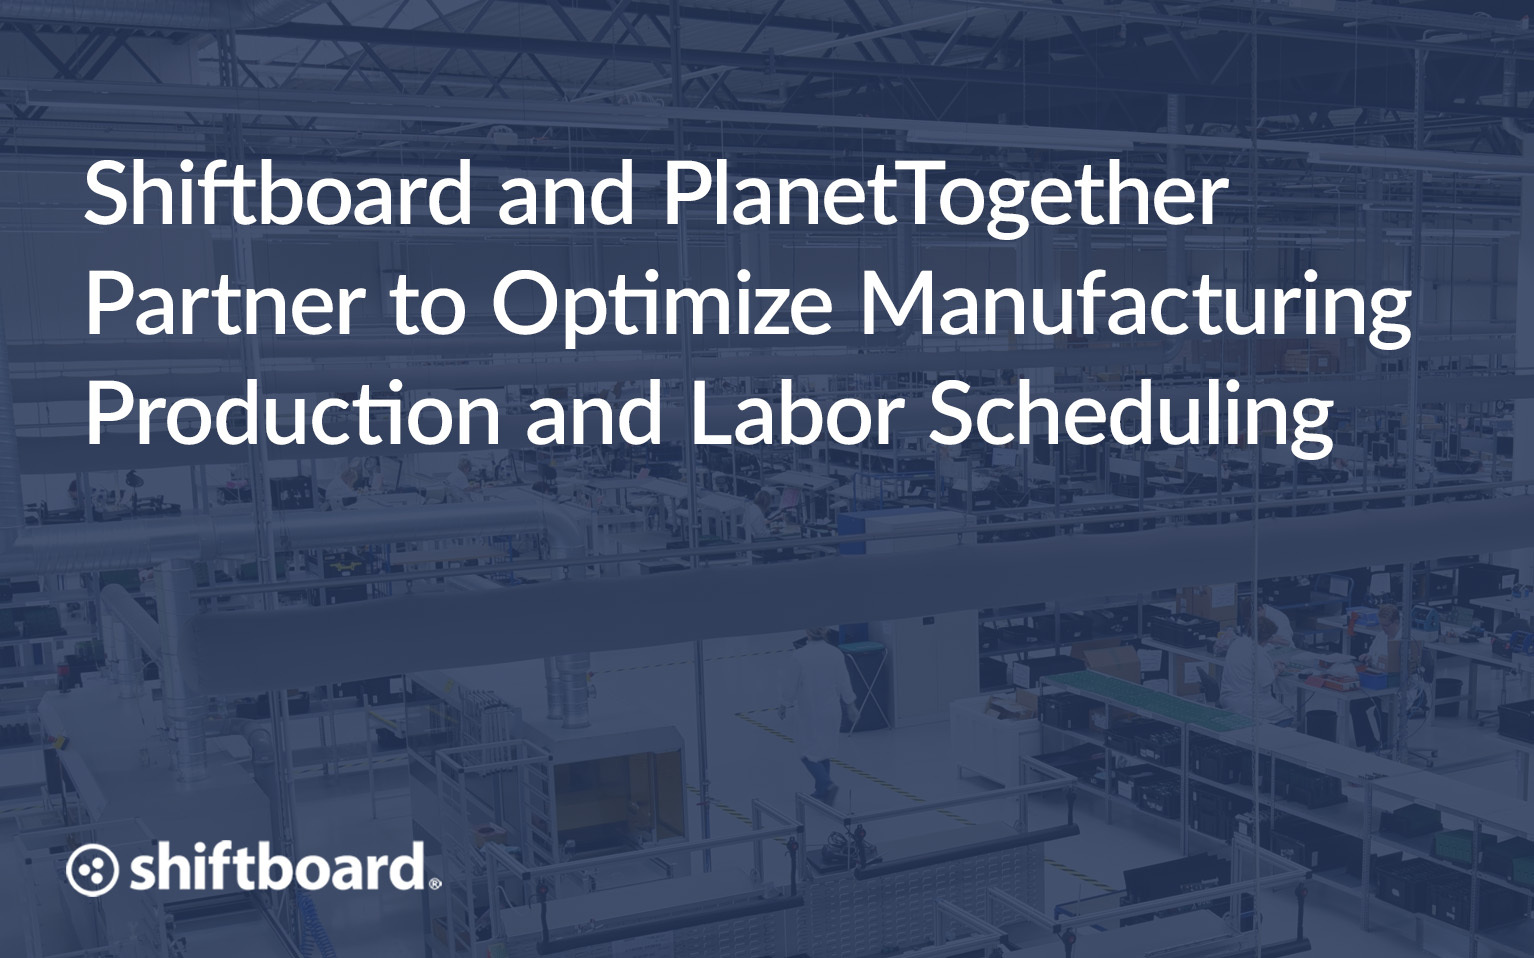 Shiftboard and PlanetTogether Partner to Optimize Manufacturing Production and Labor Scheduling